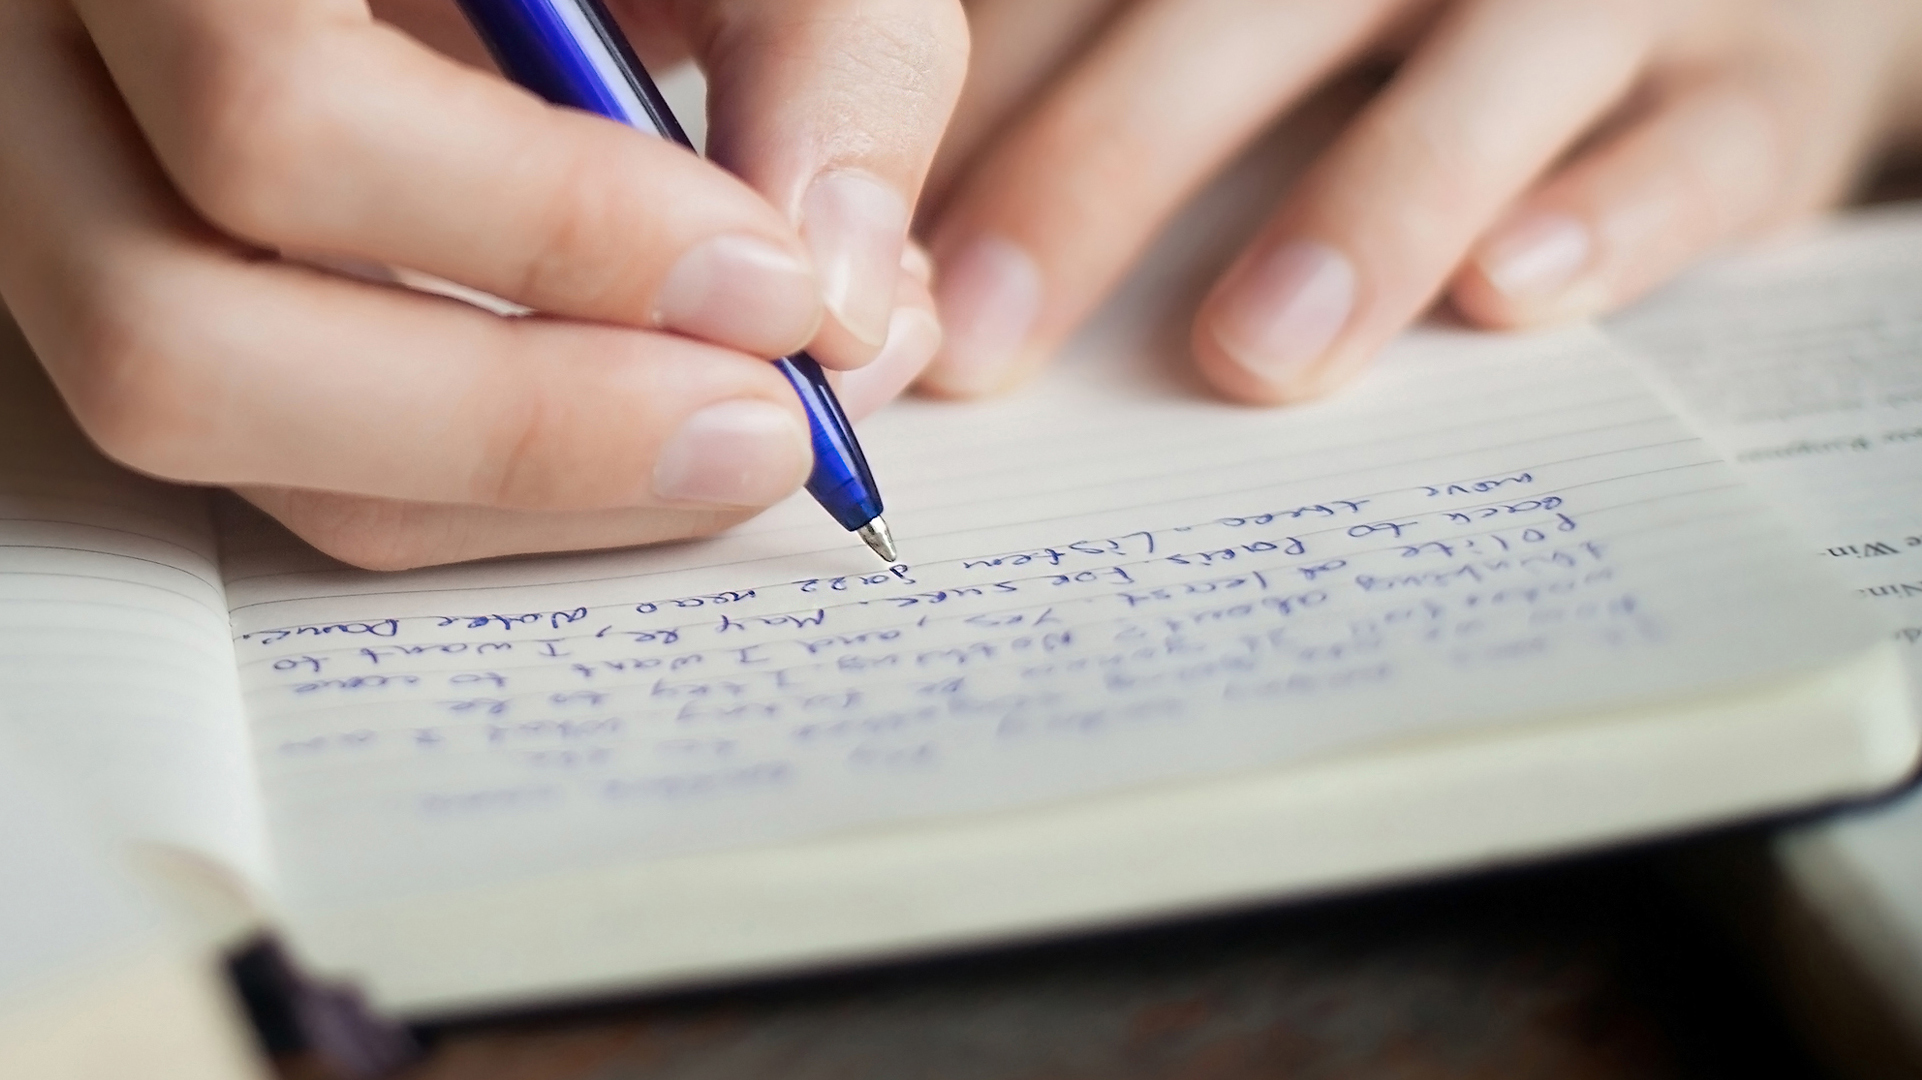 Close up of a hand holding a blue pen writing in a notebook